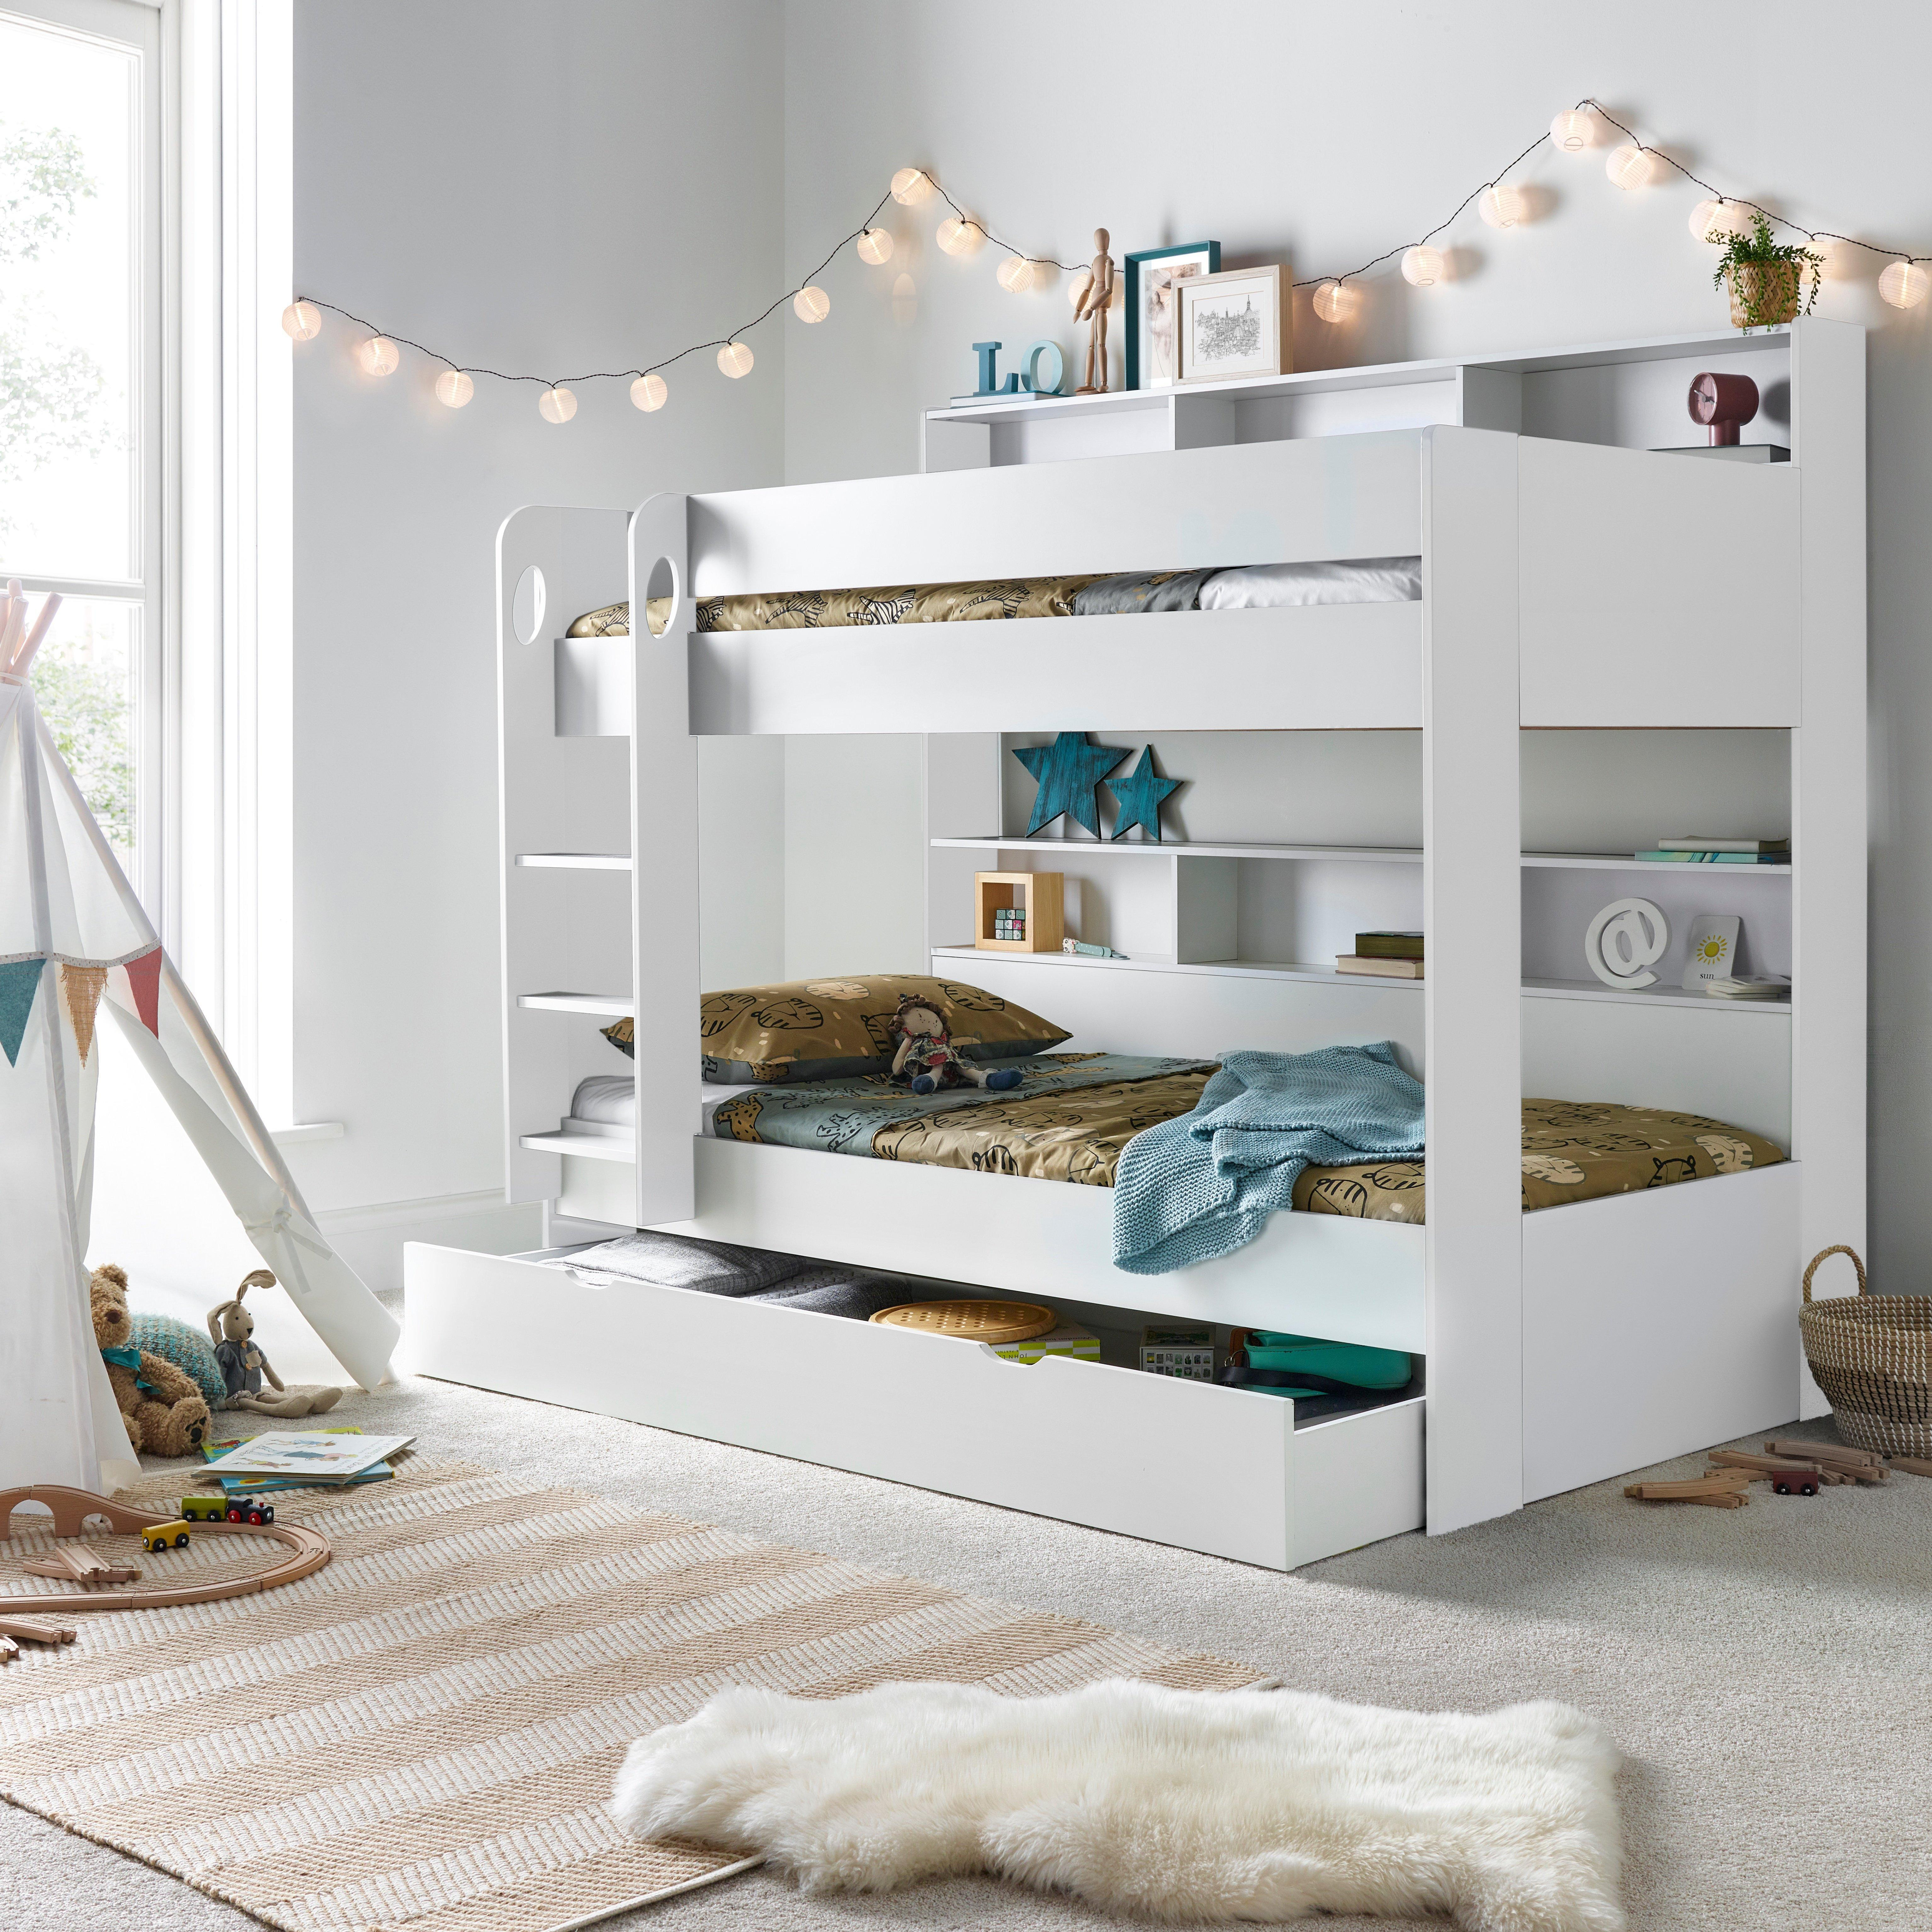 Olly Storage Bunk Bed Without Drawer With Pocket Mattresses - image 1